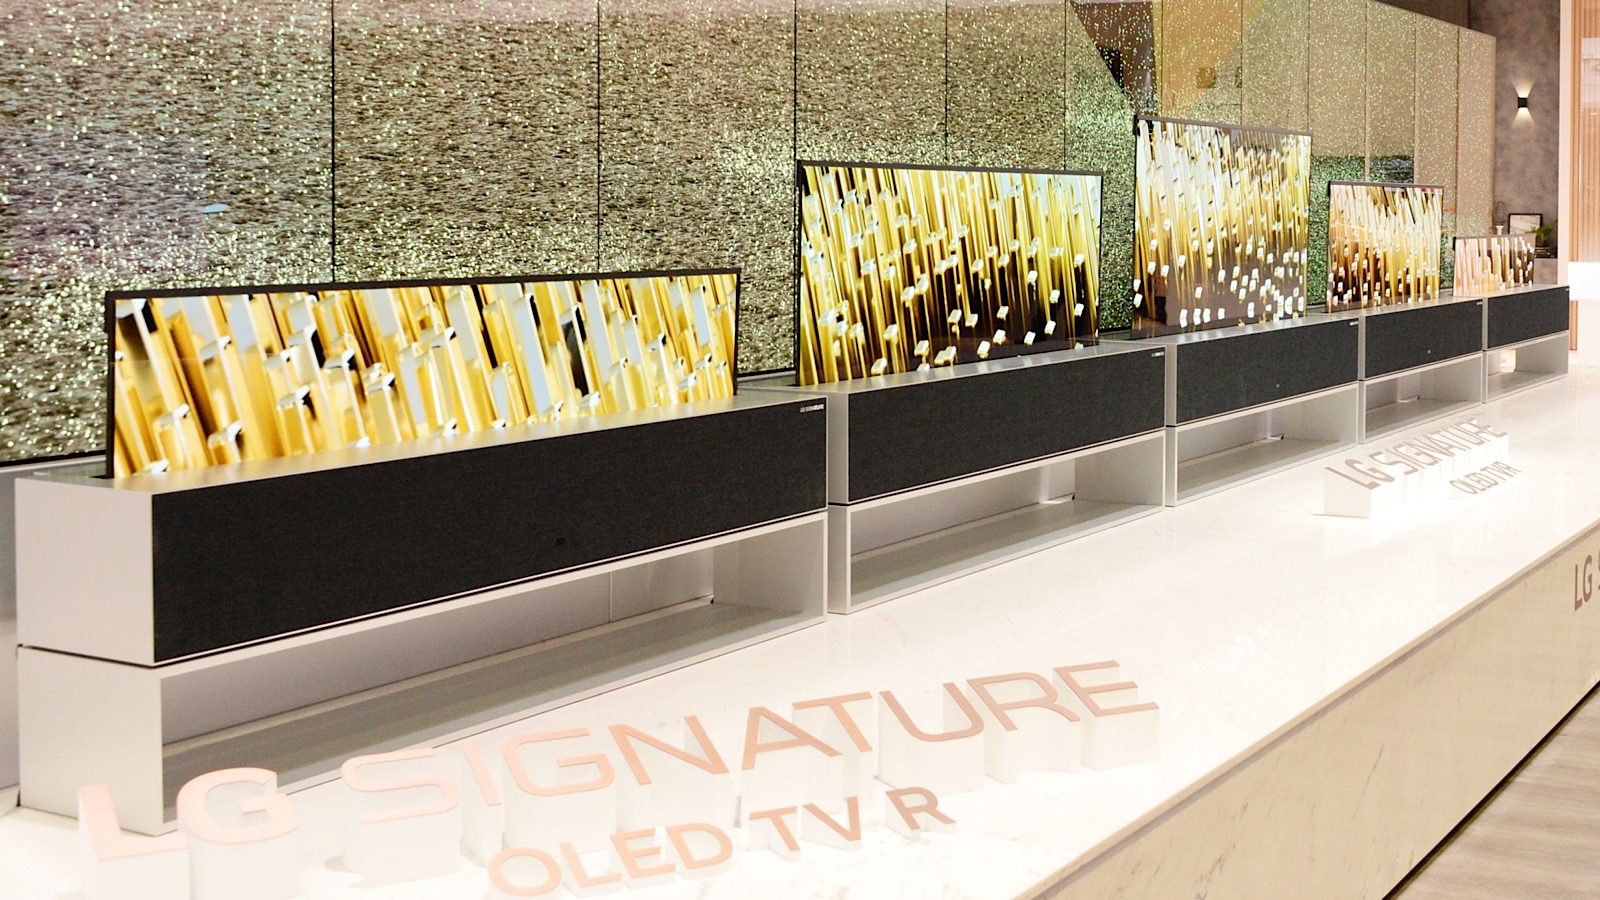 LG Signature OLED TV R launched at CES 2019